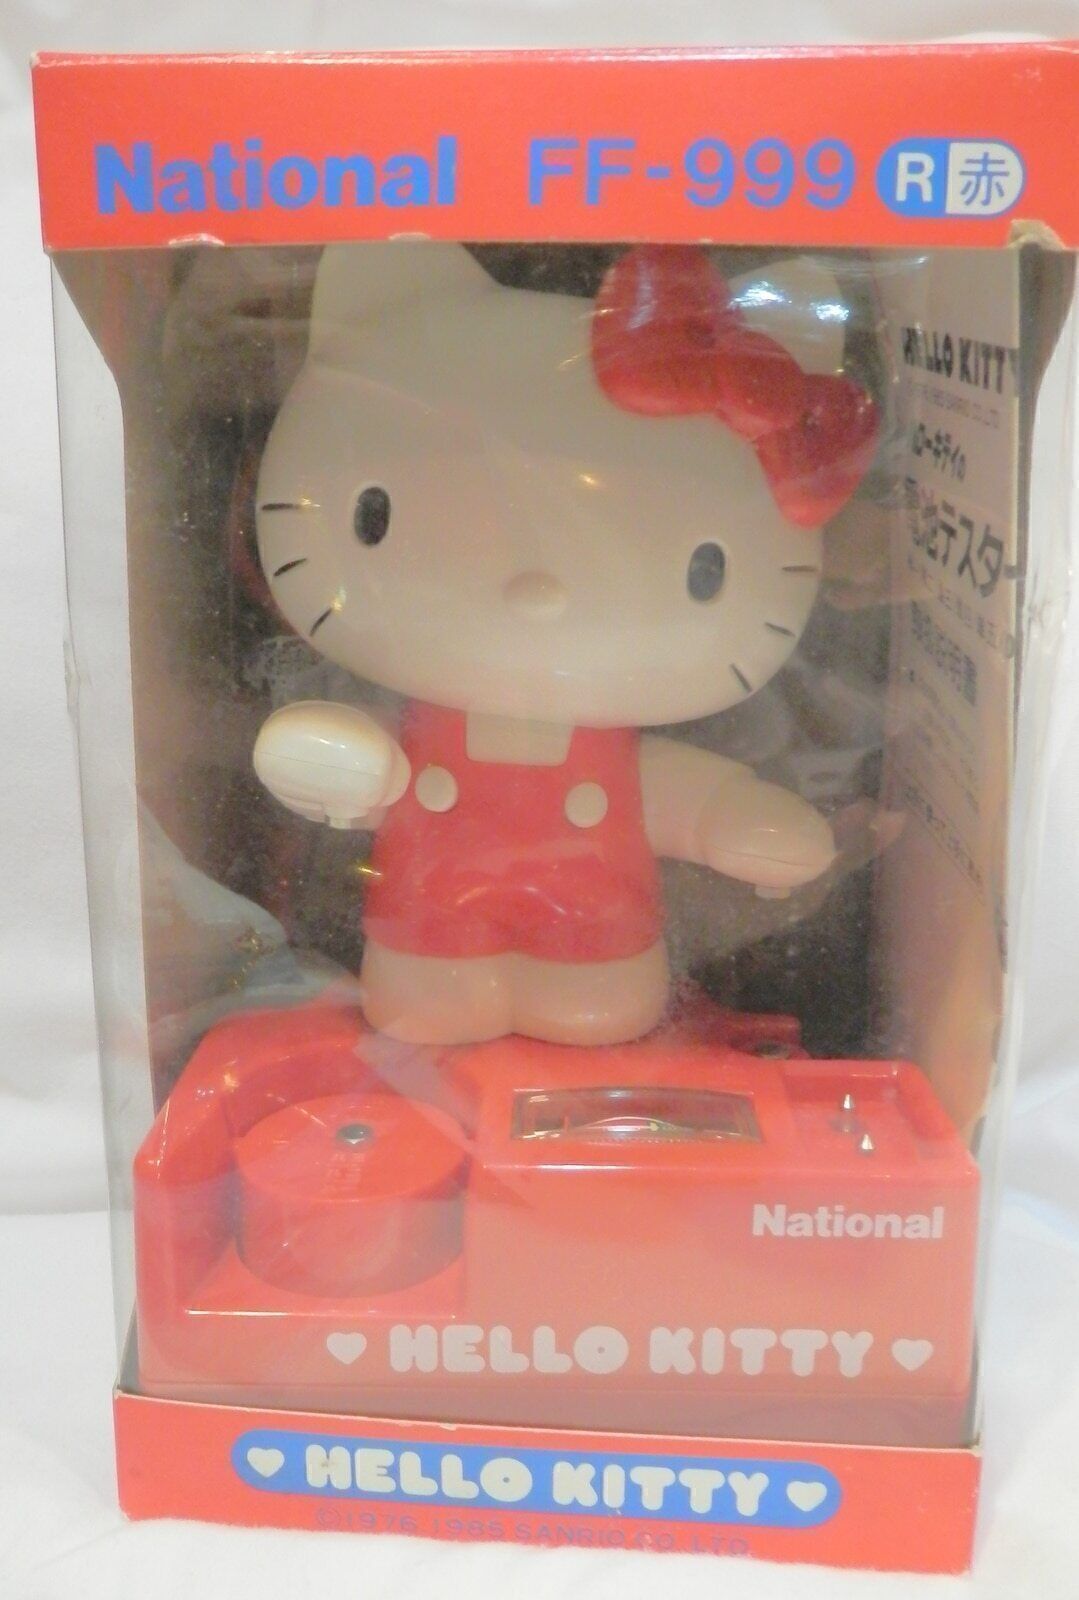 Sanrio National Hello Kitty Battery Tester Red